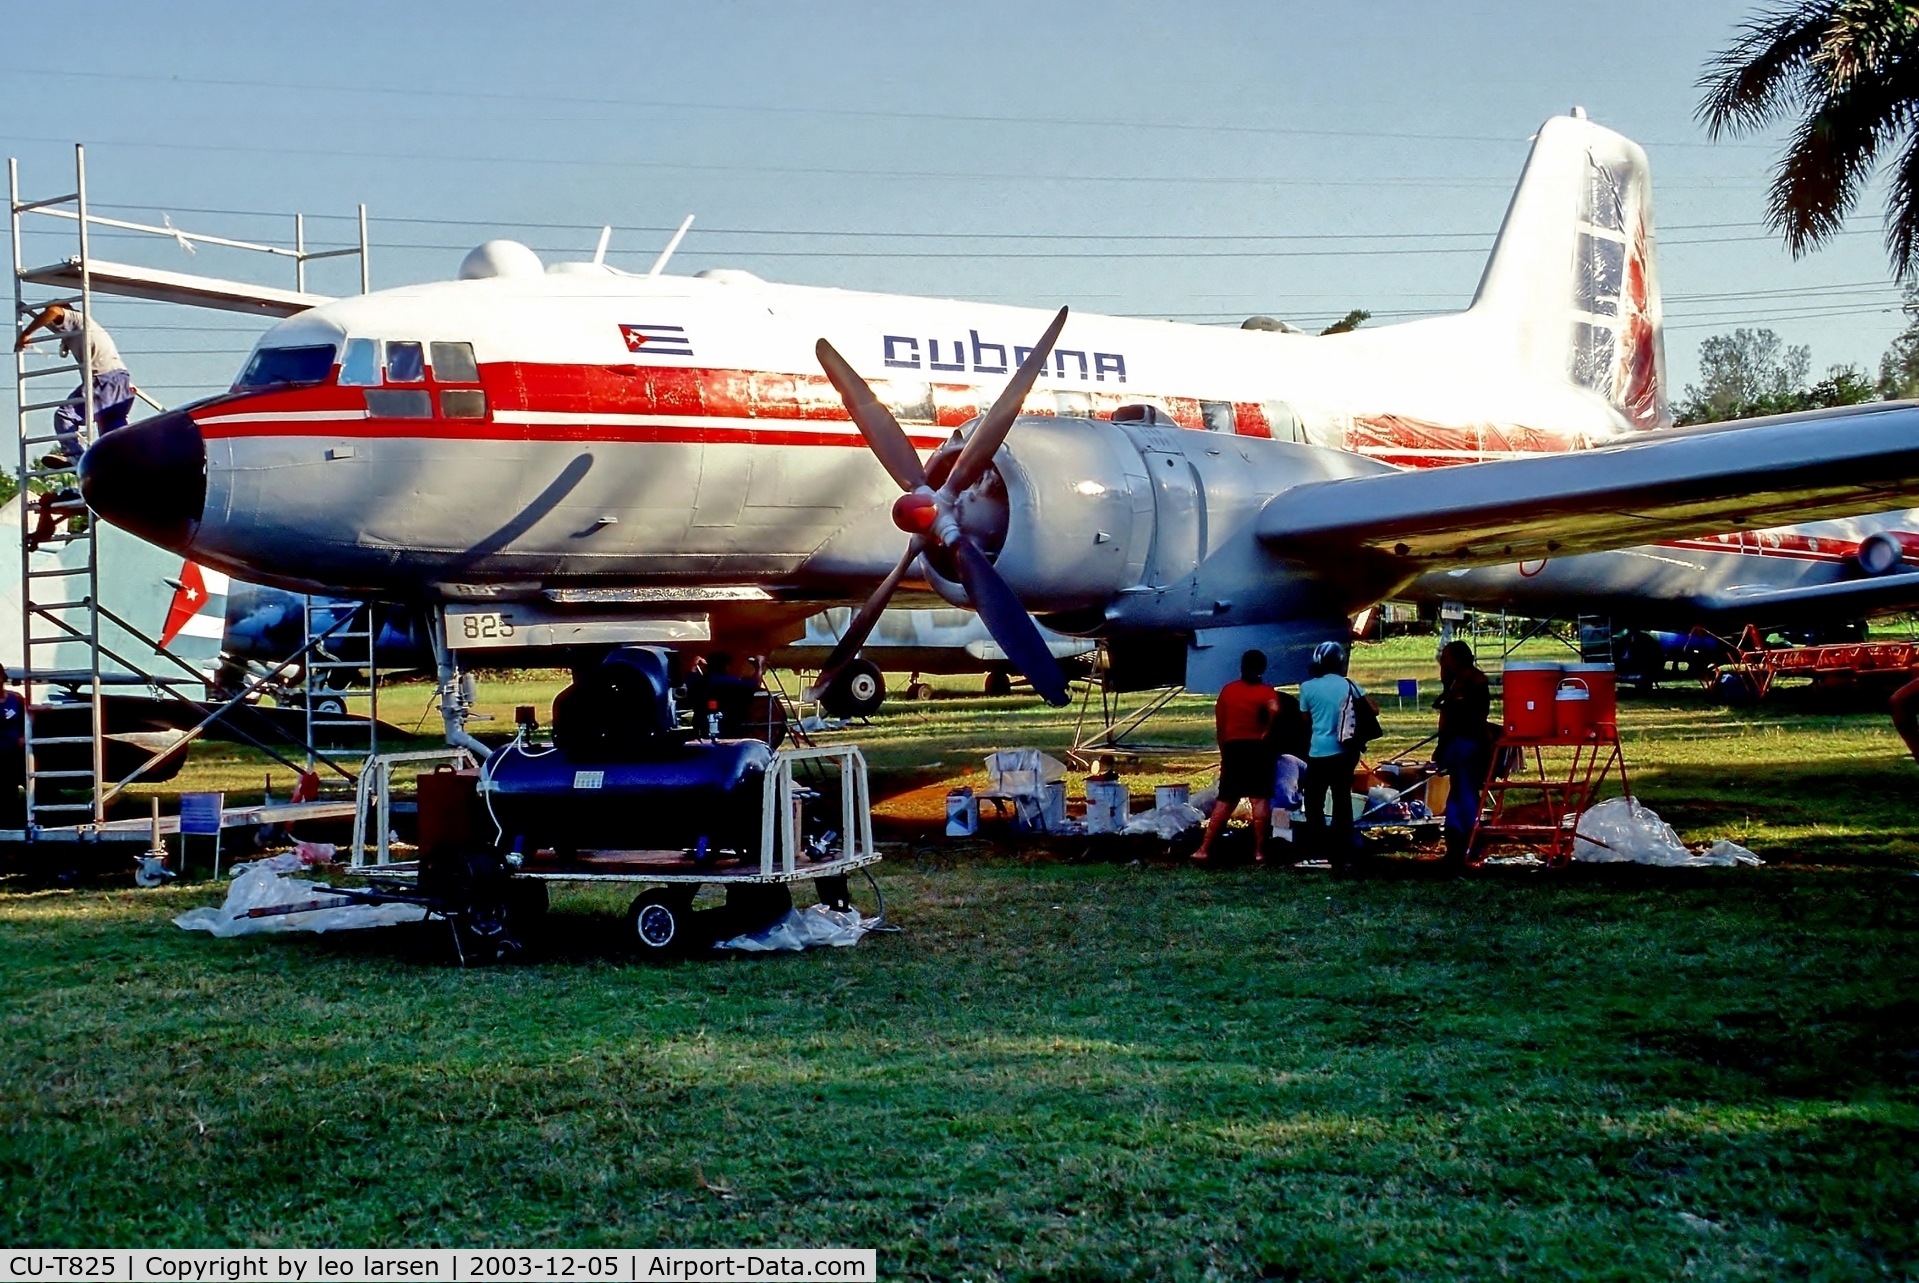 CU-T825, Ilyushin Il-14P C/N Not found CU-T825, Museo del Aire Havana 5.12.03 duing  painting
Work.